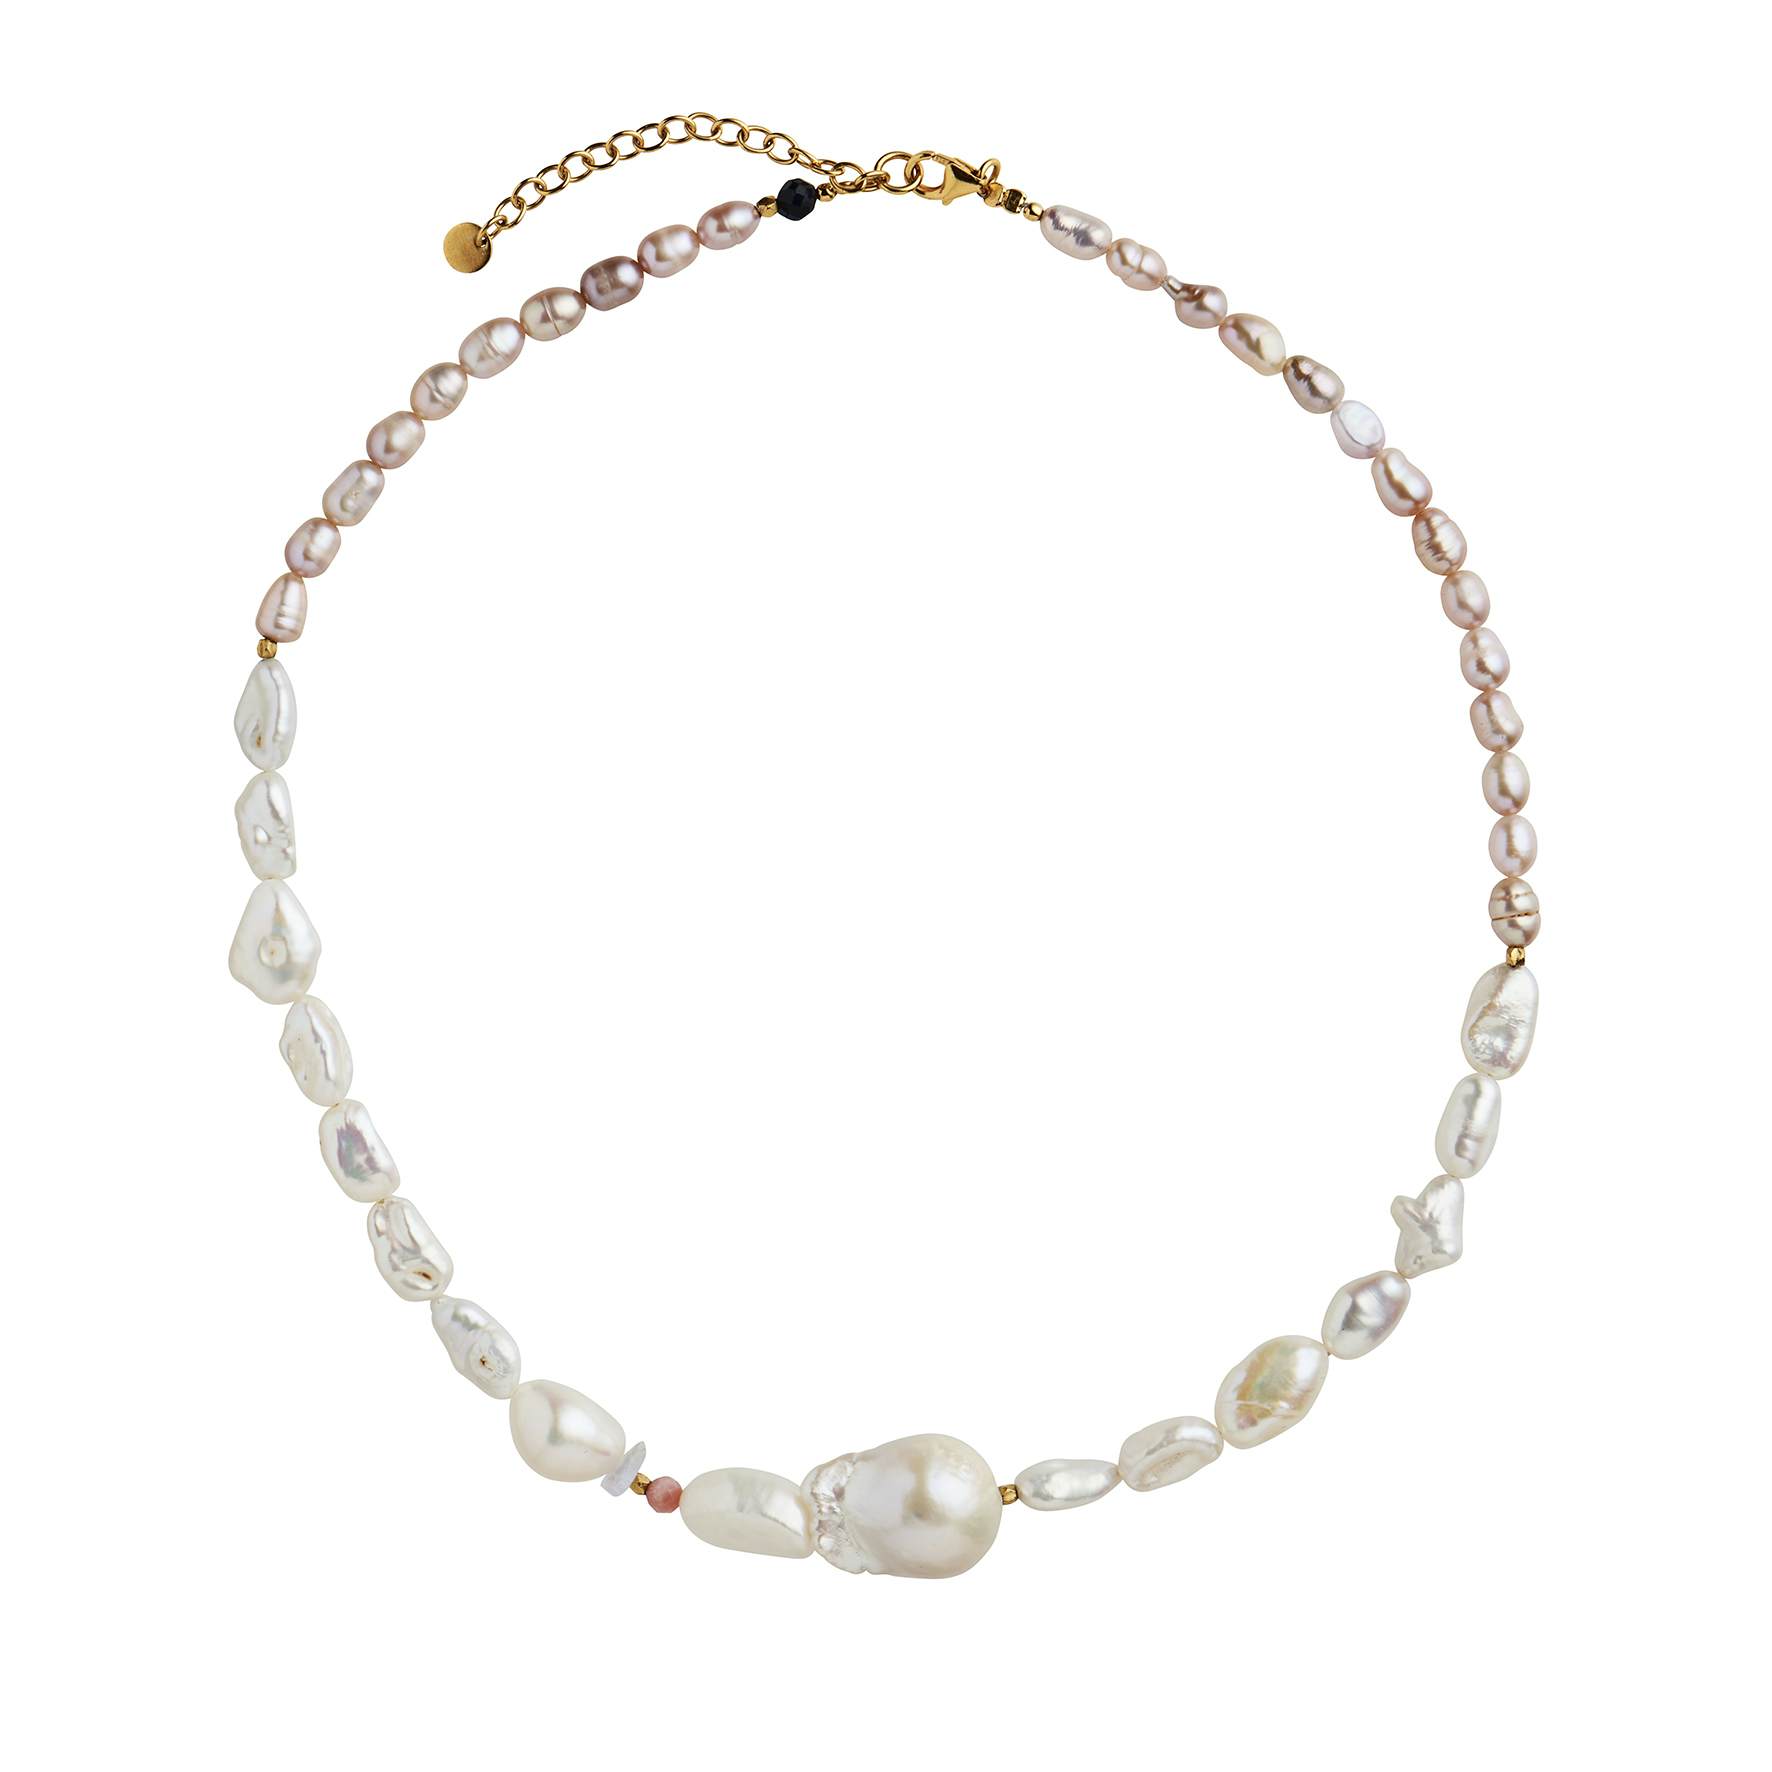 Chunky Glamour Pearl Necklace - White & Rose from STINE A Jewelry in Goldplated-Silver Sterling 925